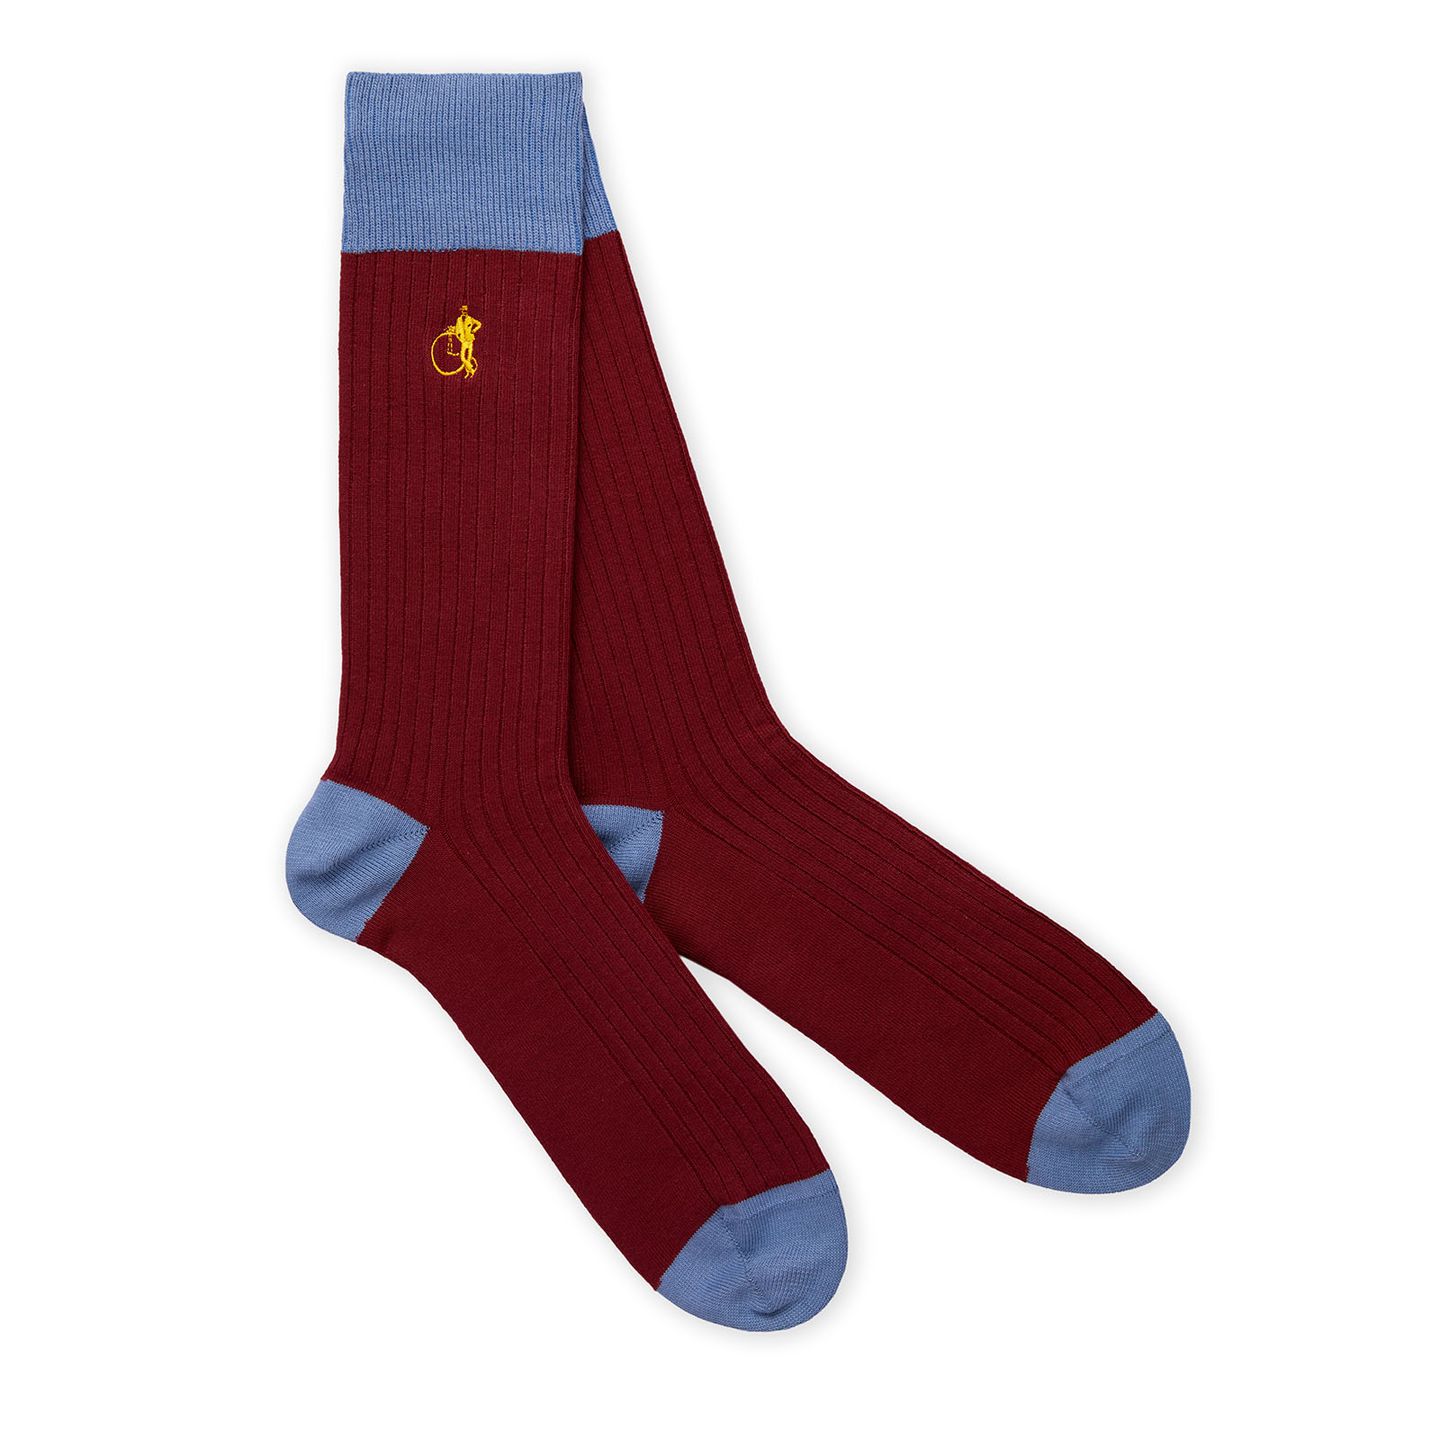 Burgundy red socks with blue heel, toes and cuffs